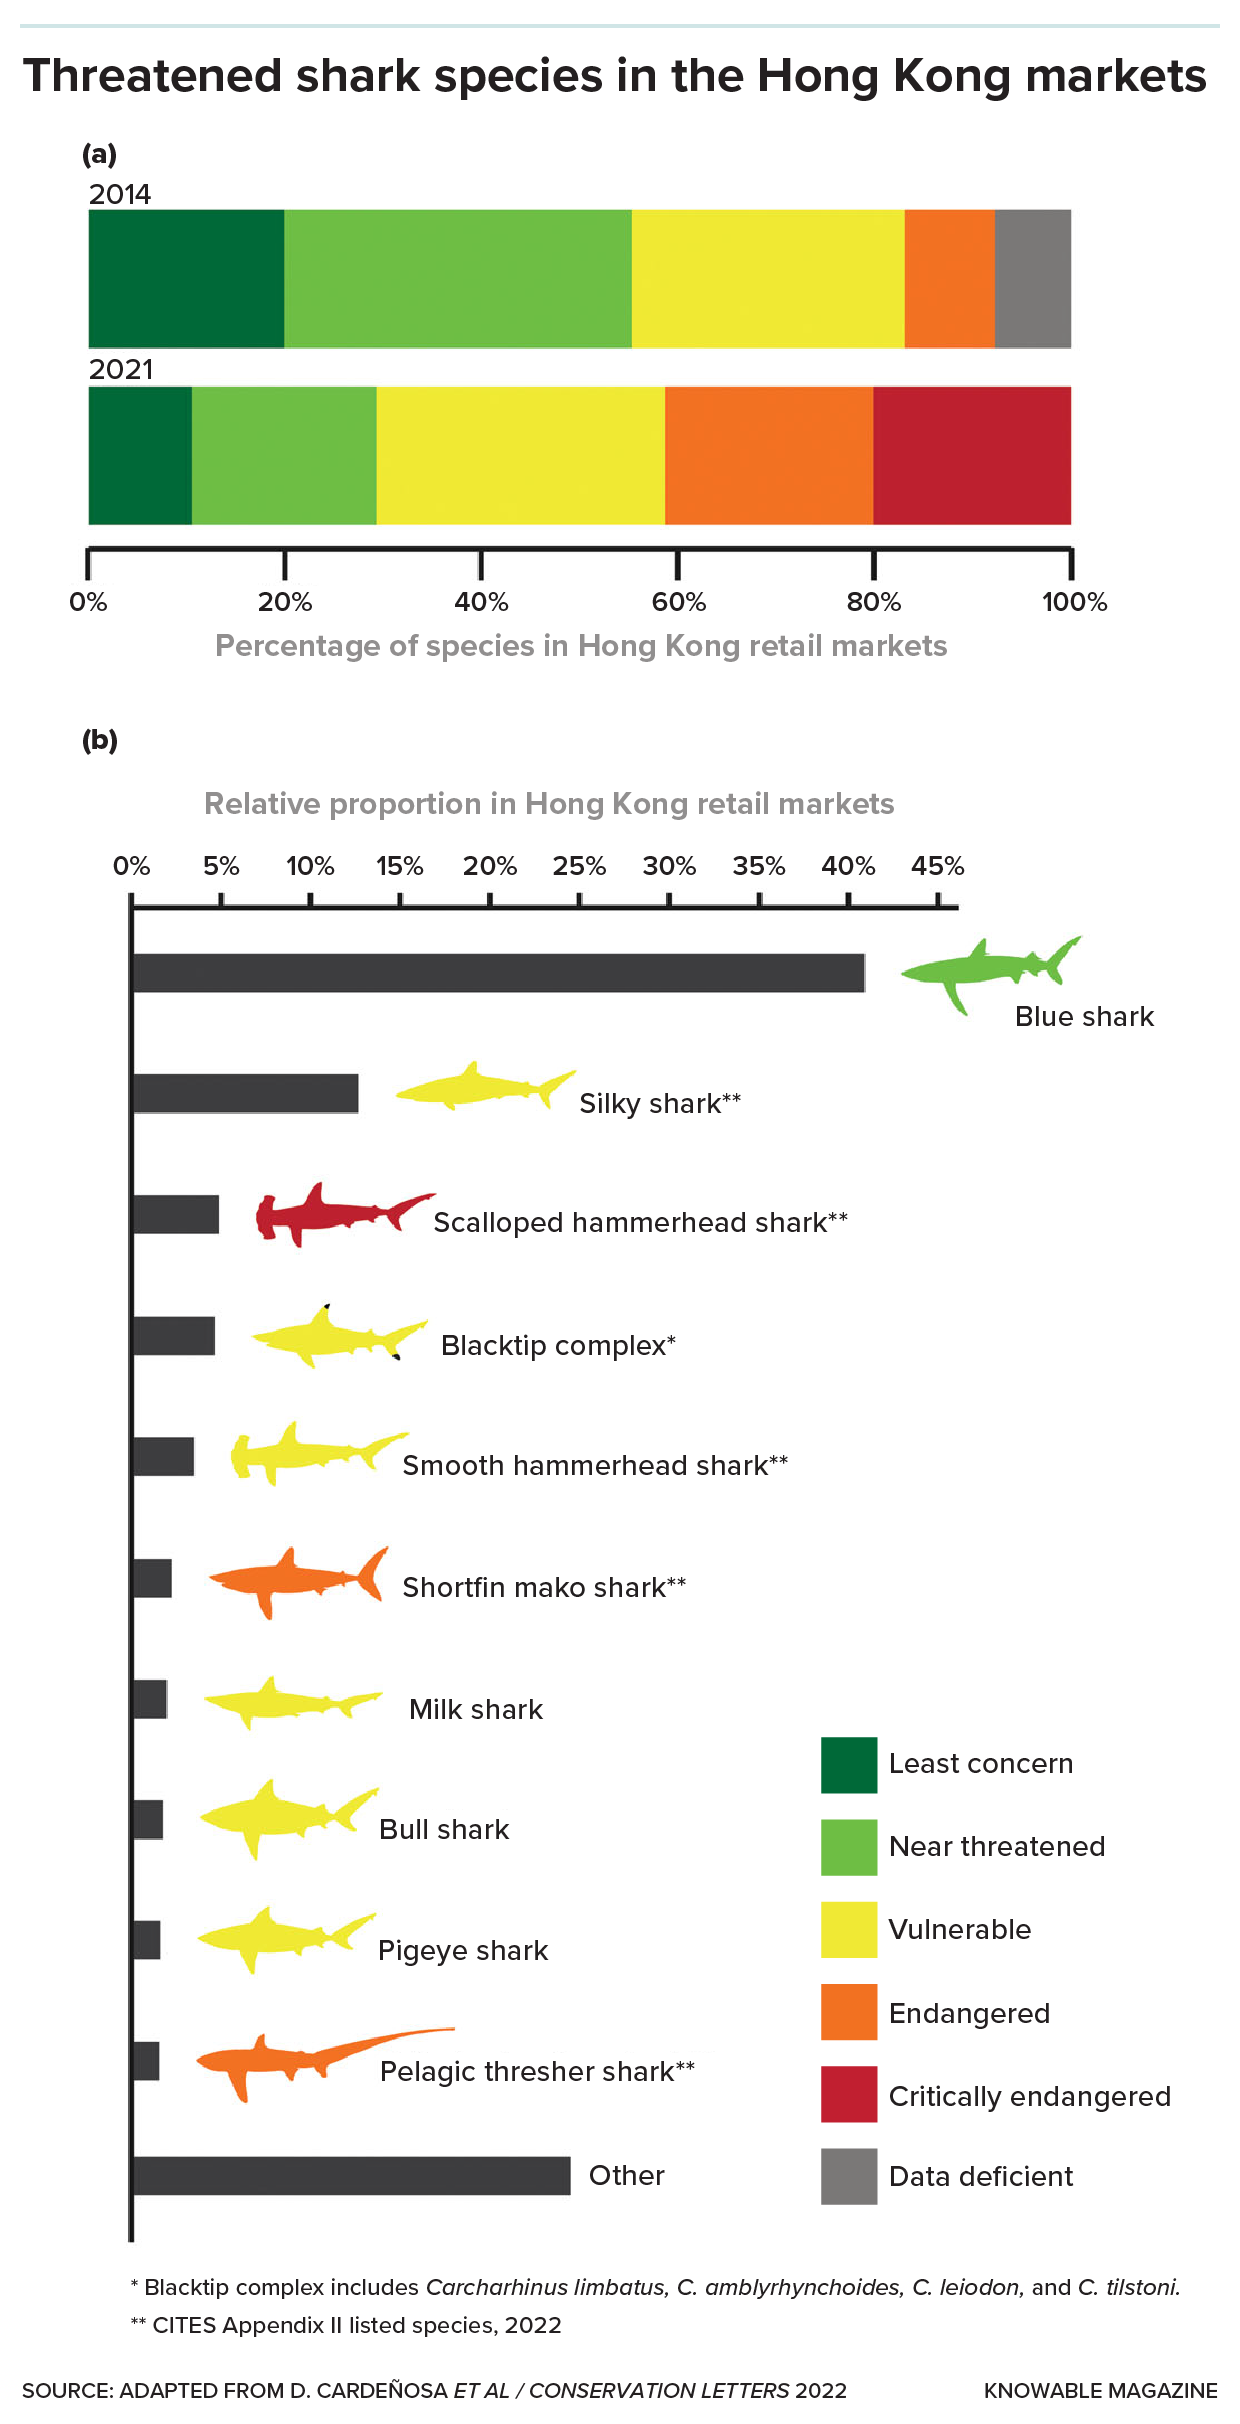 A bar graph shows the elevated contribution of threatened species to the shark fin trade in Hong Kong markets between 2014 and 2021. Below that, another bar graph shows the relative contribution of premium-value species of sharks in that market, as well as their IUCN vulnerability status.